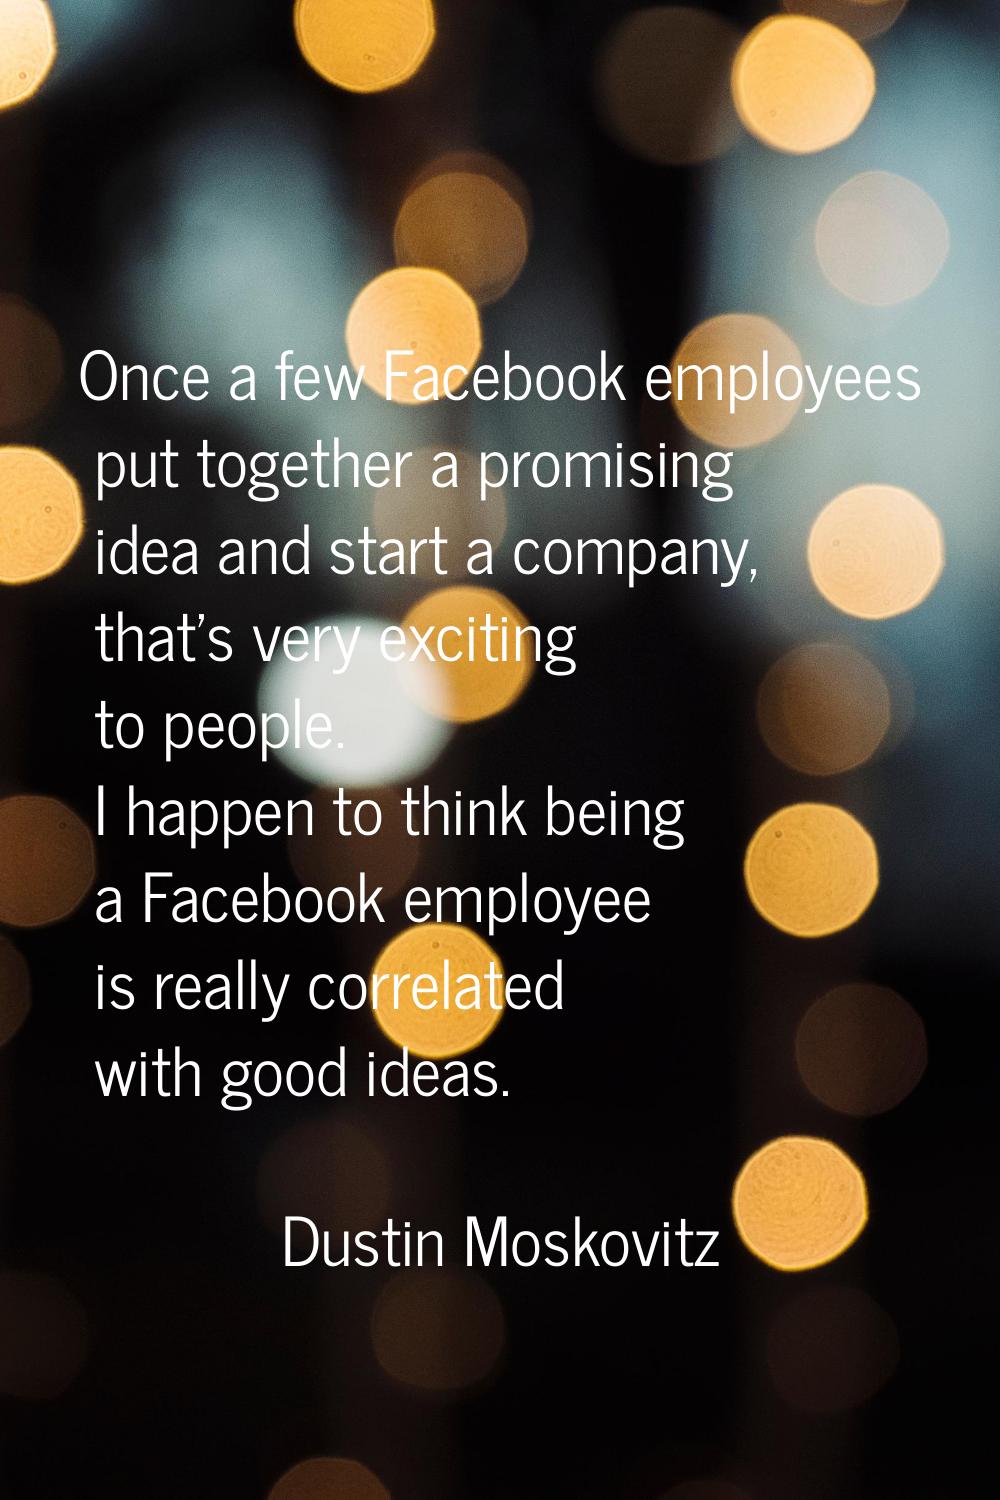 Once a few Facebook employees put together a promising idea and start a company, that's very exciti